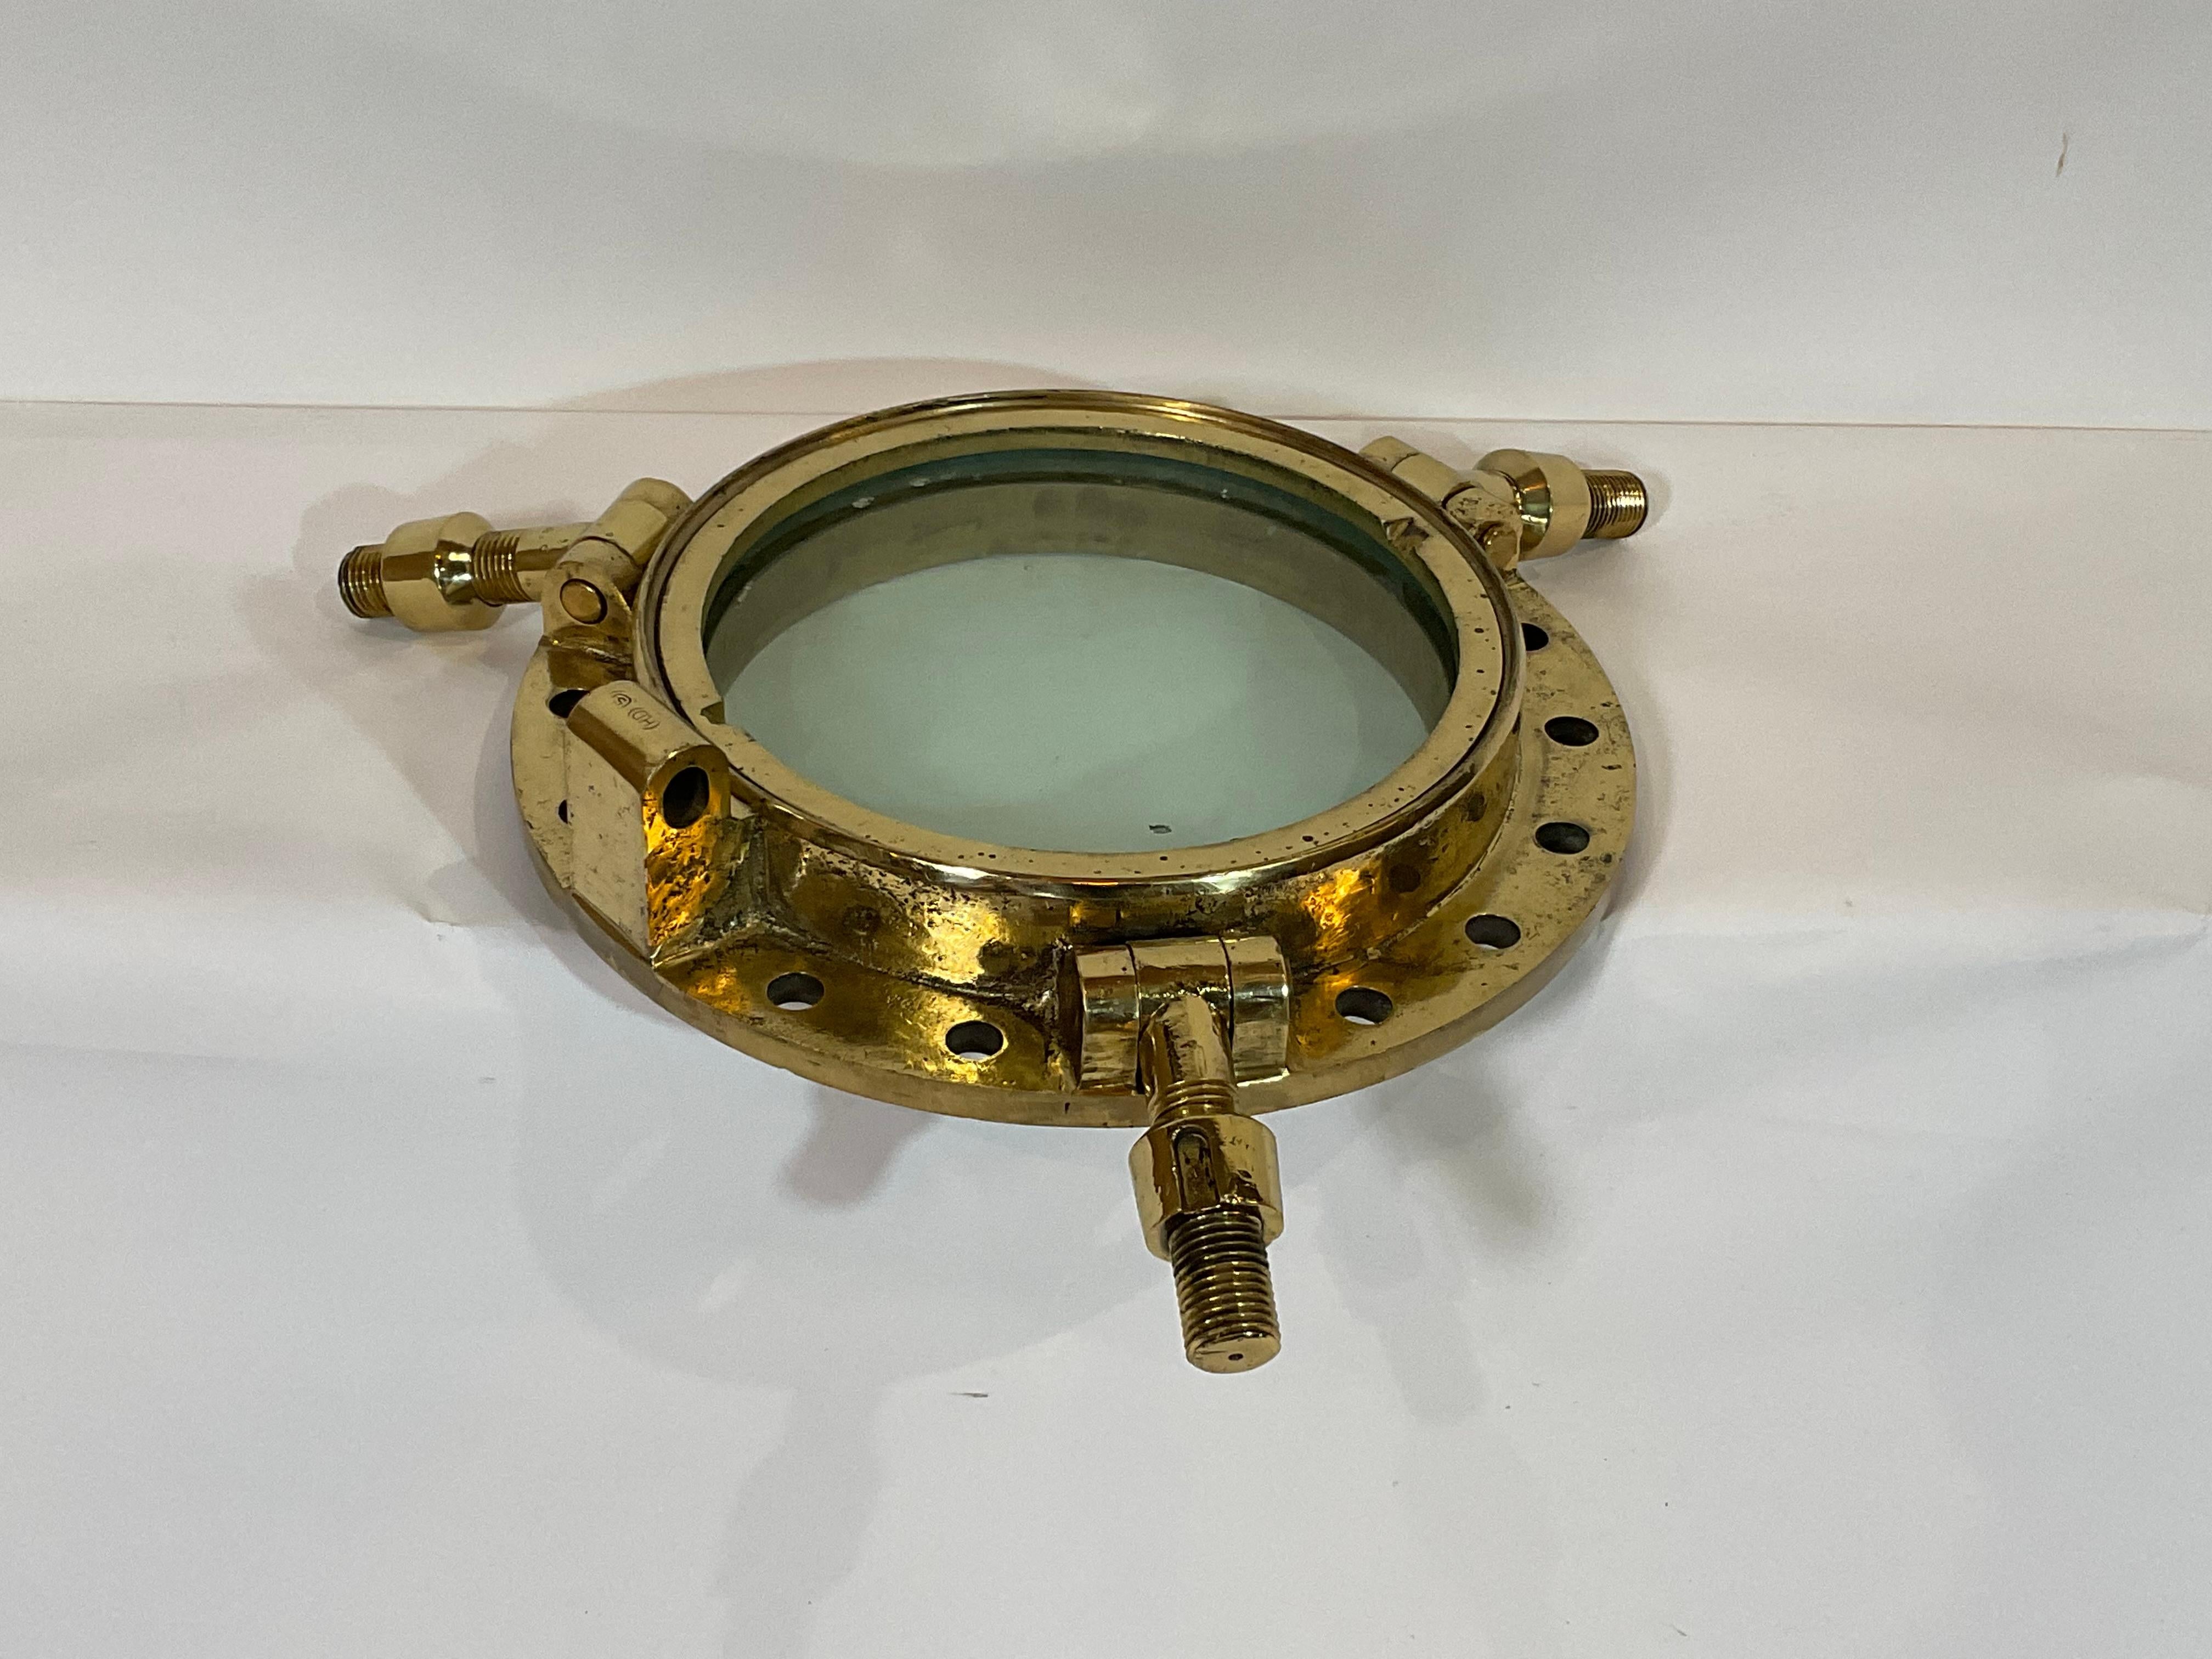 North American Solid Brass Ships Porthole For Sale